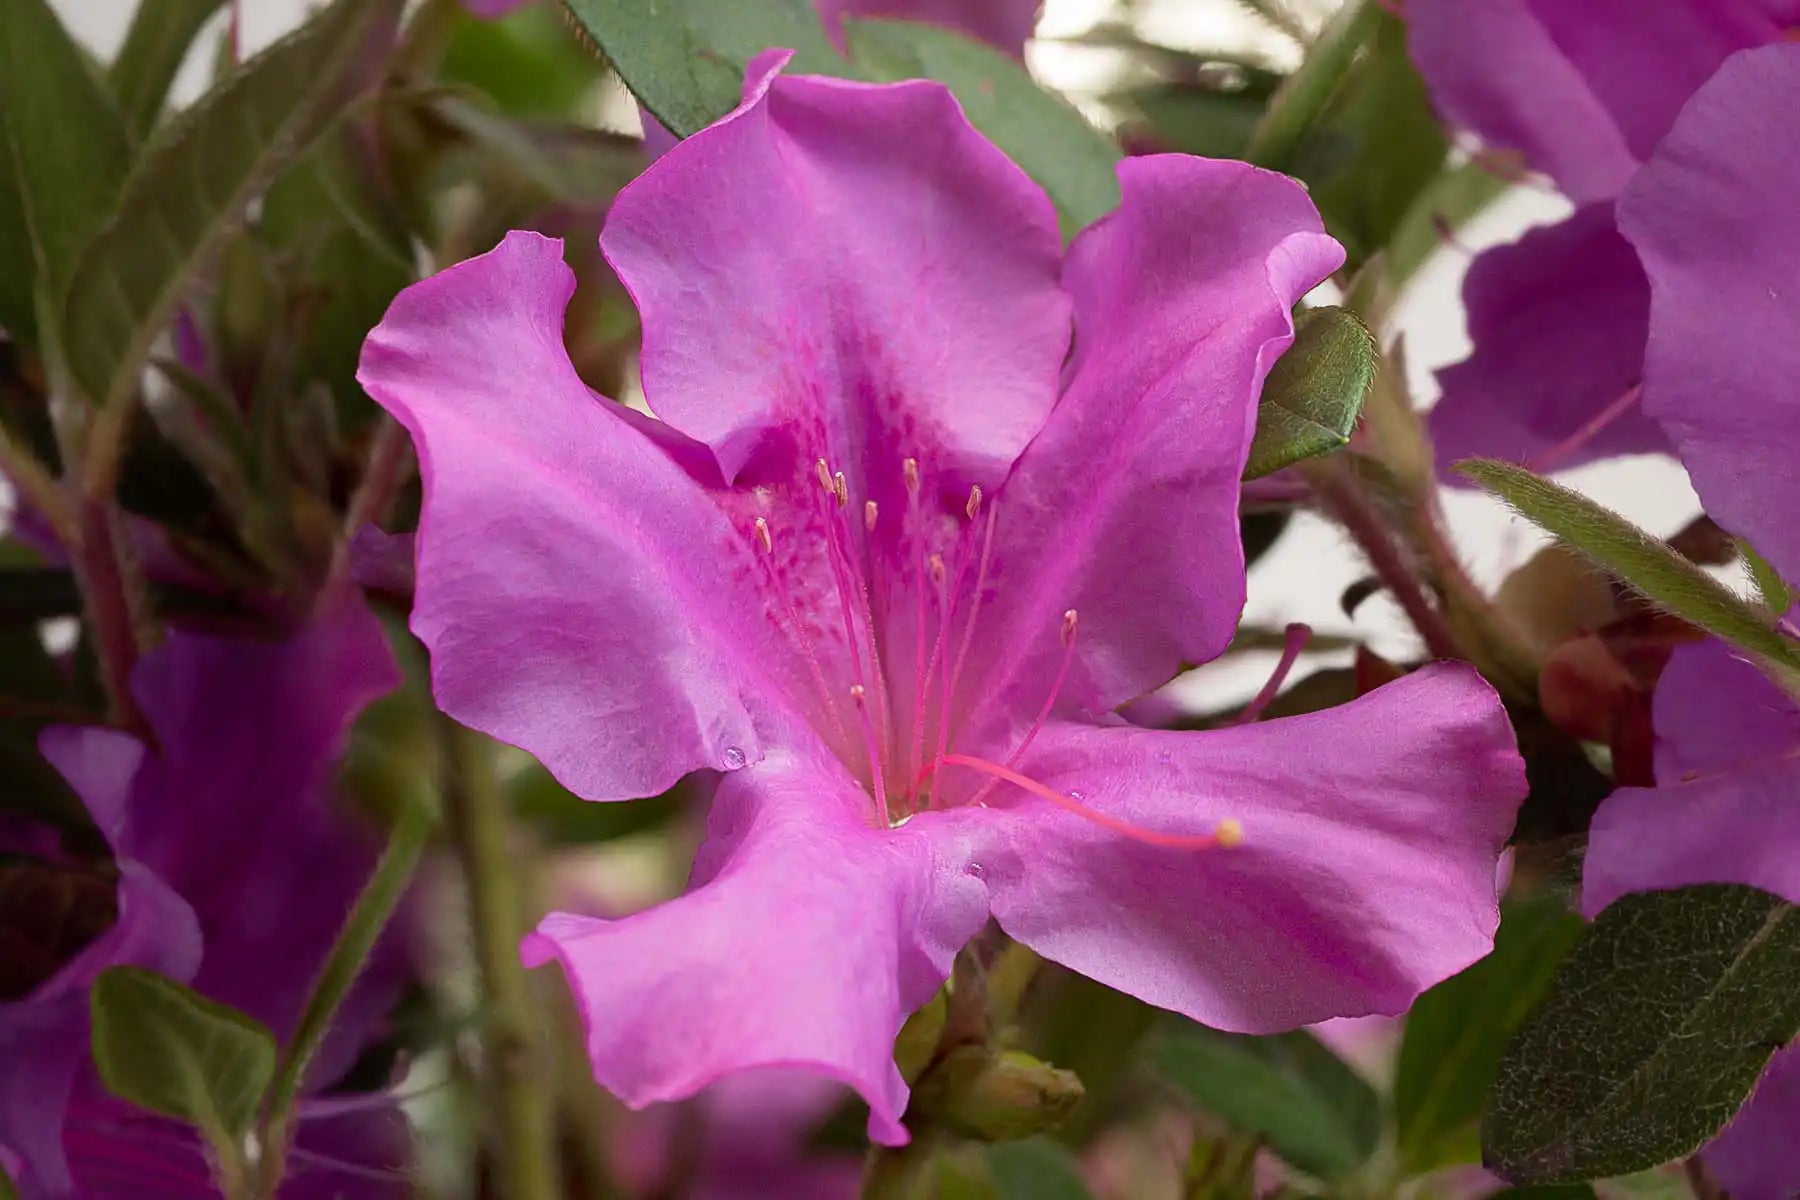 Closeup of a single bright purple Encore® Autumn Royalty™ Azalea bloom peeking out of a tangle of foliage. Blooms like this display very large, up to 3-1/2" across. This azalea, unlike others, starts blooming in the spring and continues well into the fall.